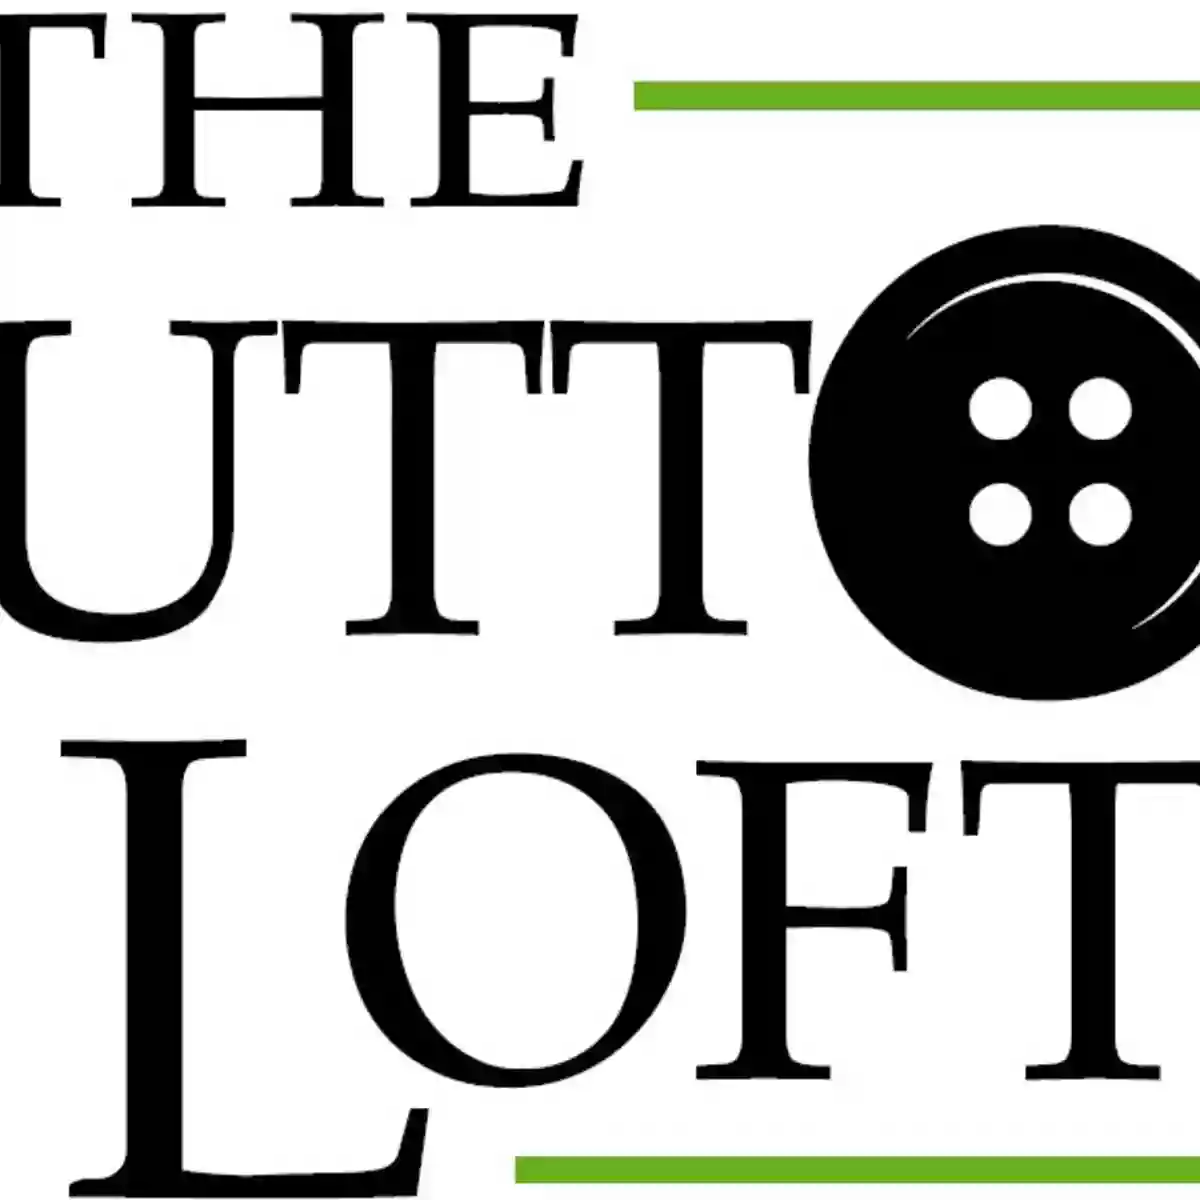 The Button Lofts